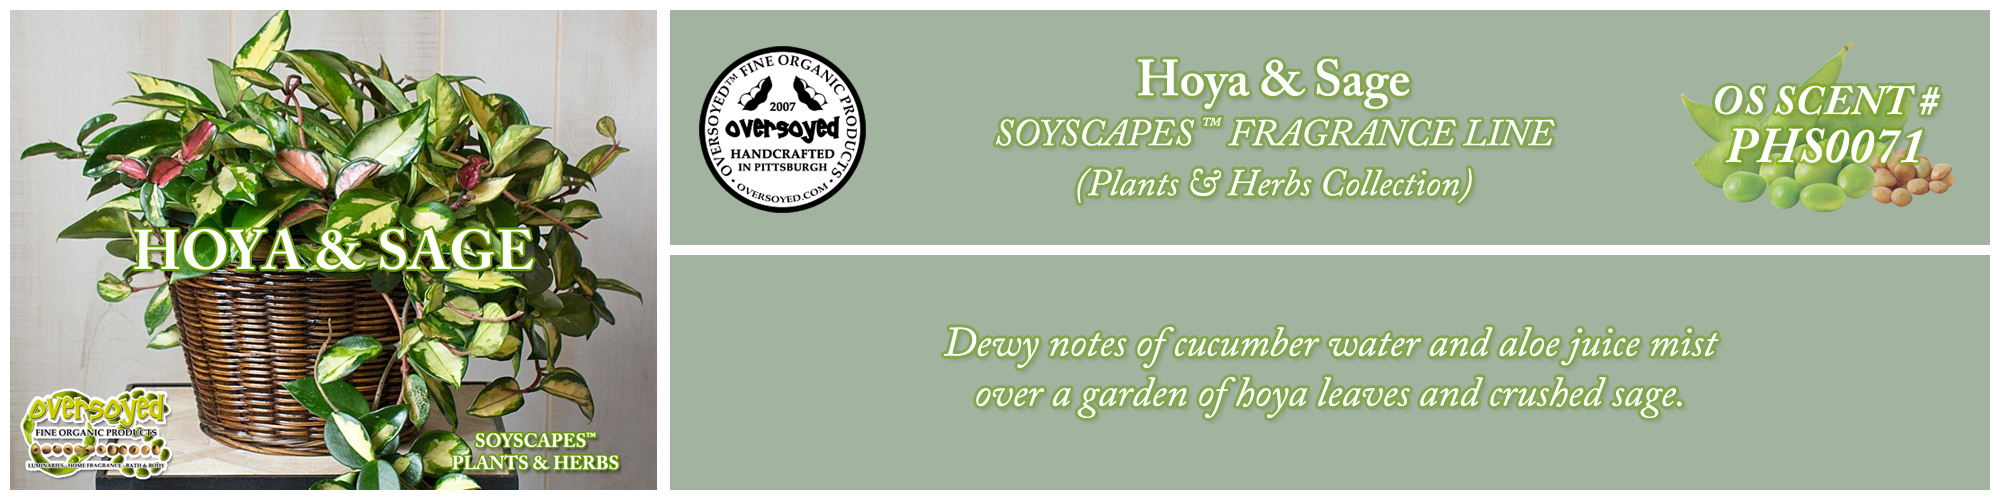 Hoya & Sage Handcrafted Products Collection